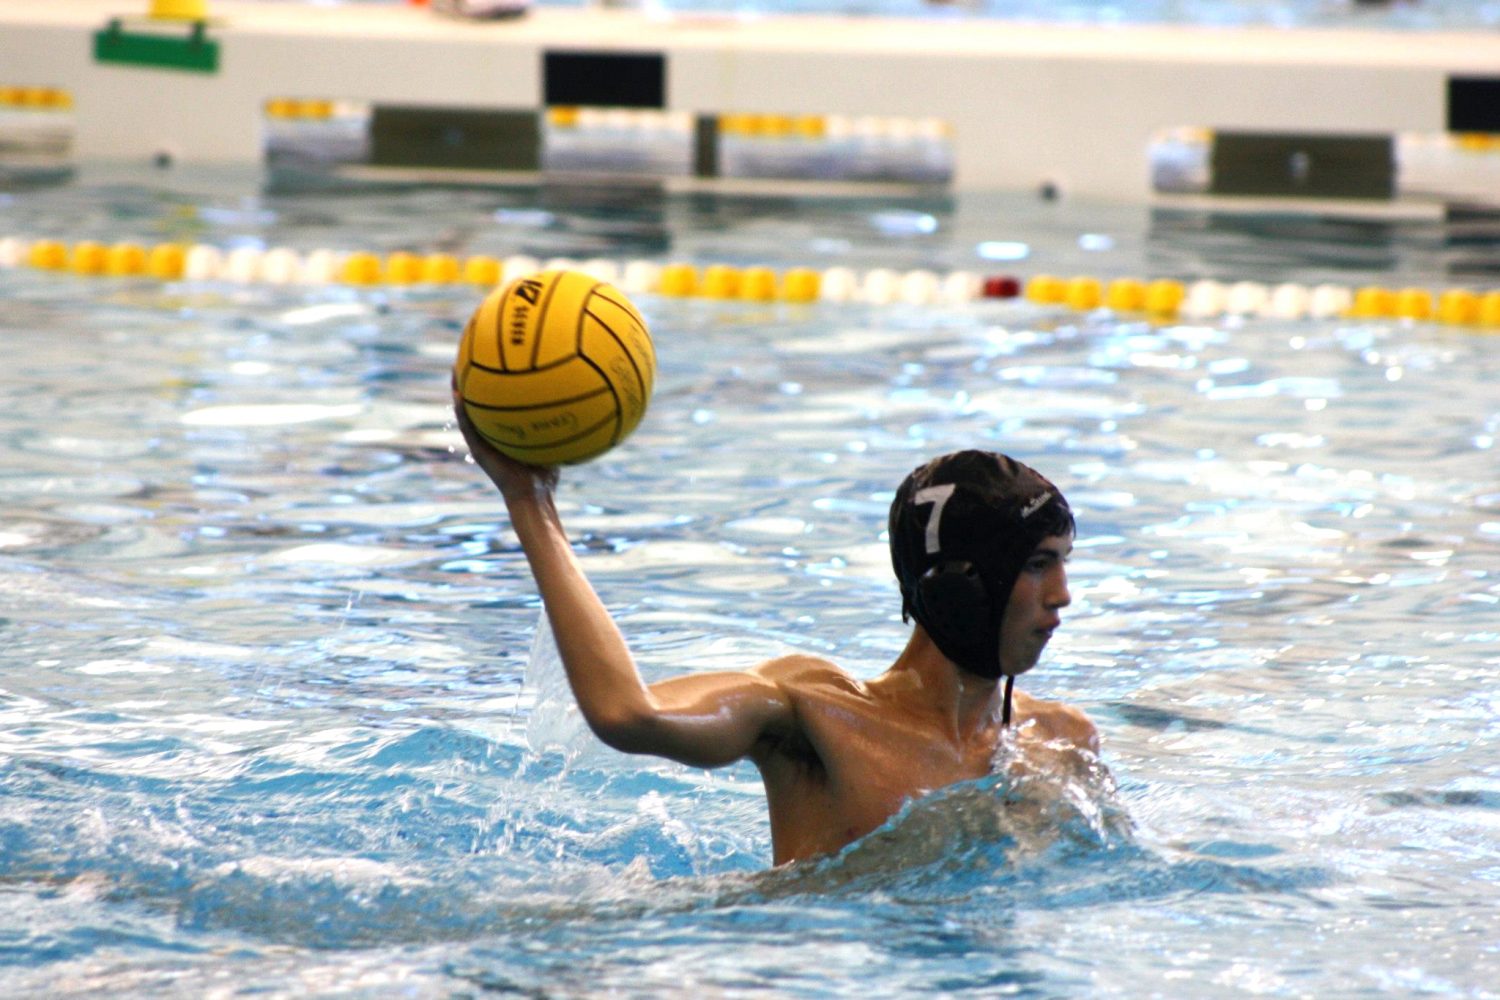 Senior+Luke+Paddock+takes+aim+at+the+goal+in+a+water+polo+game.